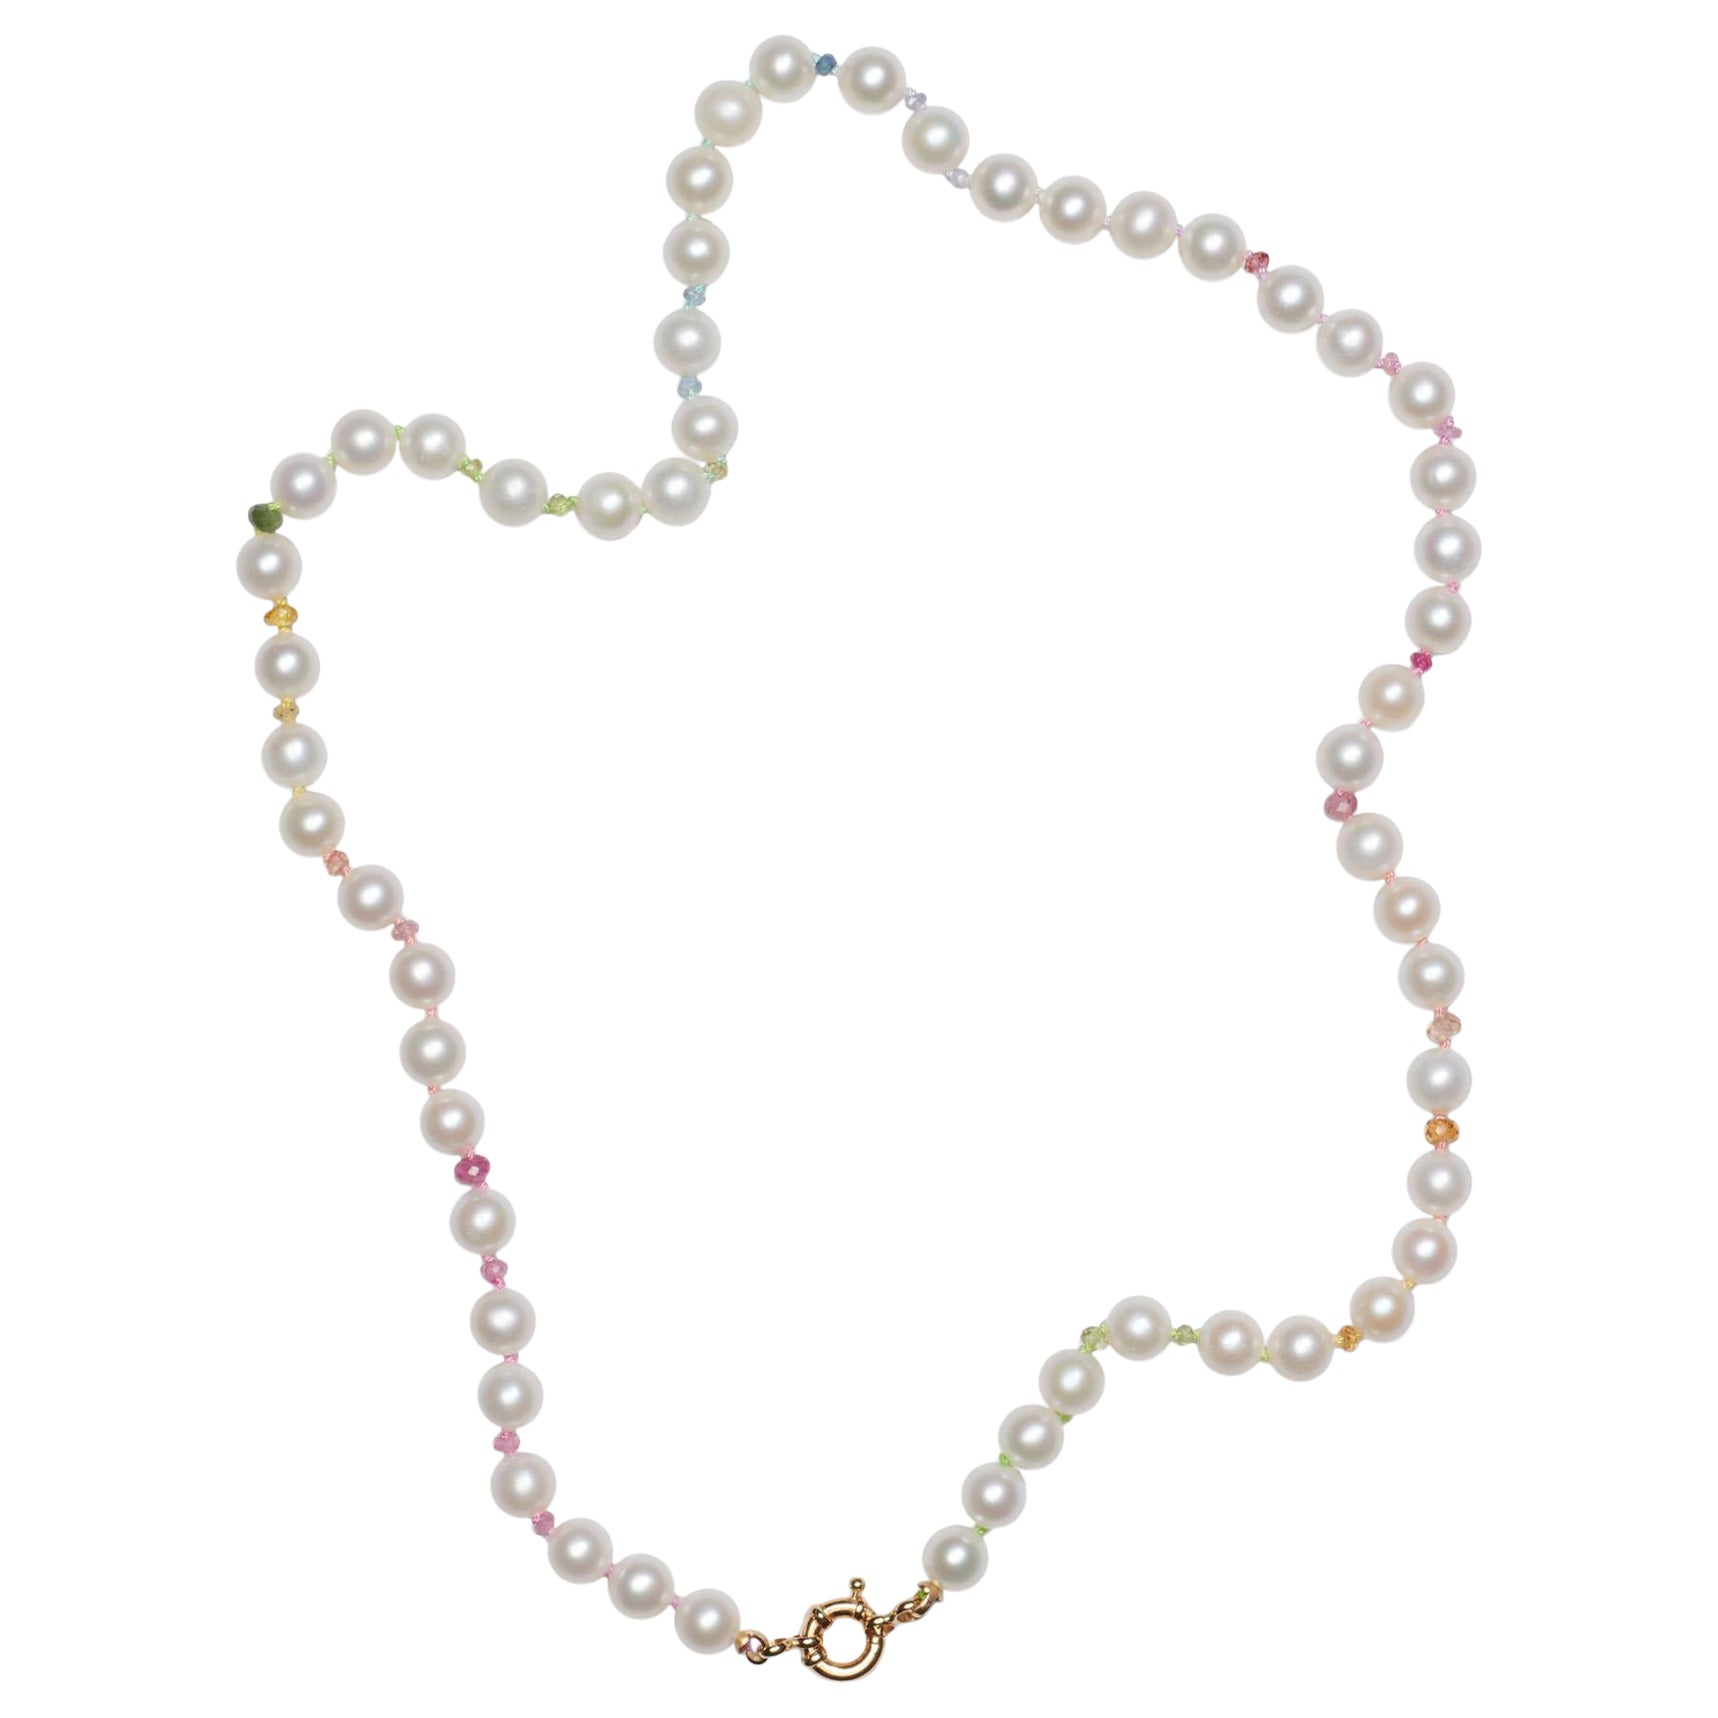 The classic white pearl necklace with 6mm pearls, sparkling multicolor sapphires and other gemstones! Colors follow the pattern of the rainbow, hand knotted on multicolor silk thread, finished with an 14k solid gold clasp.

• White freshwater pearls